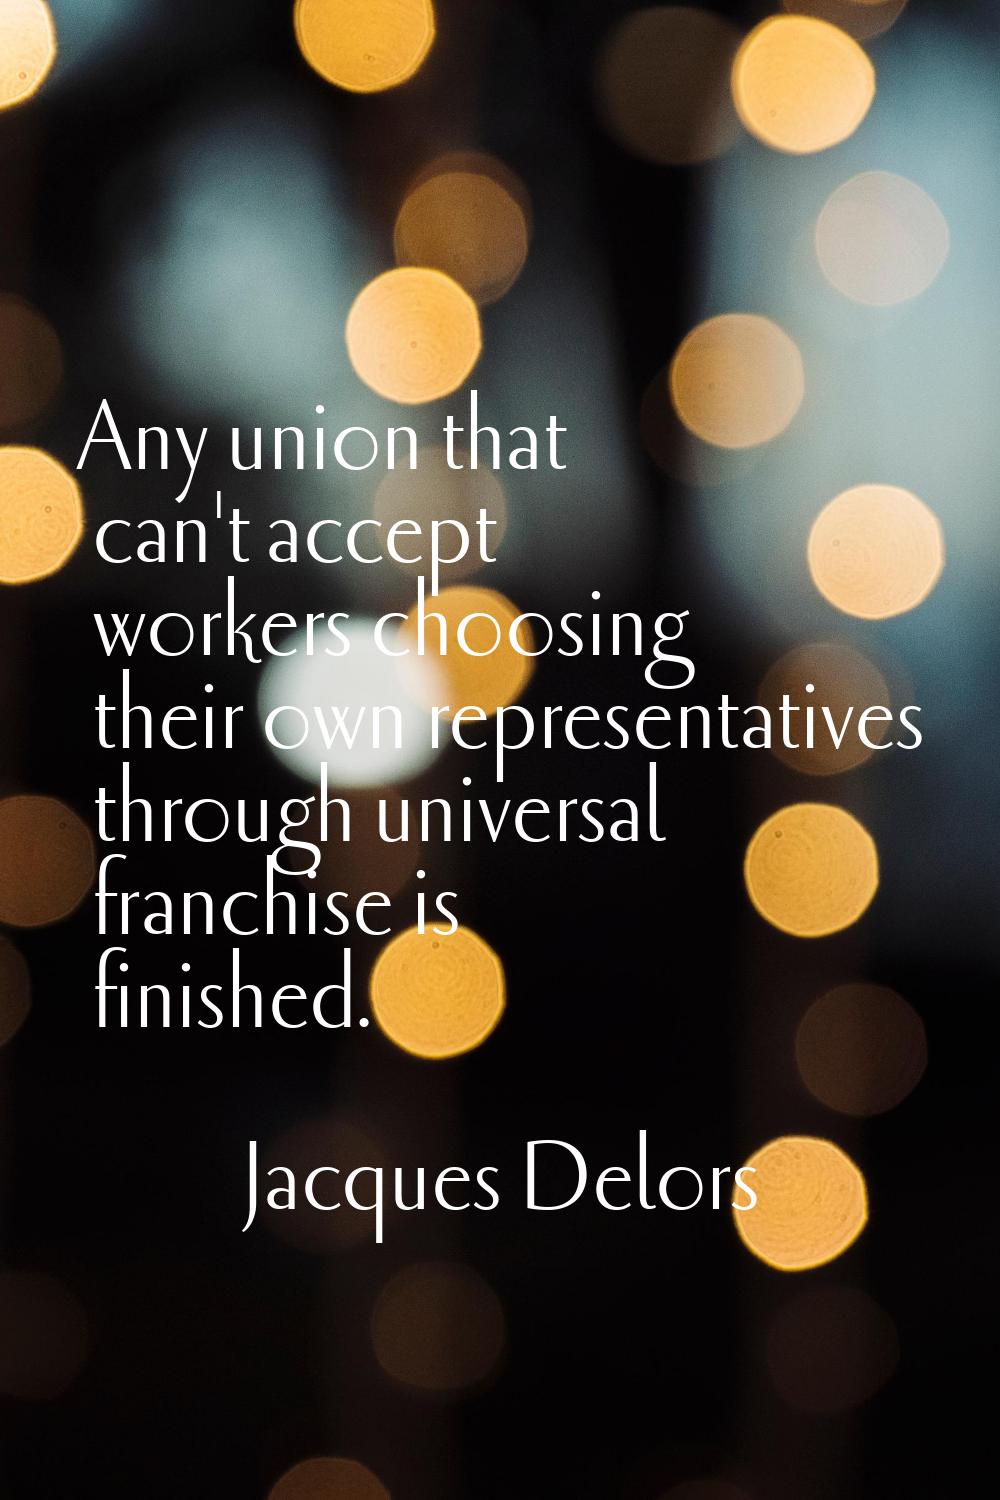 Any union that can't accept workers choosing their own representatives through universal franchise 